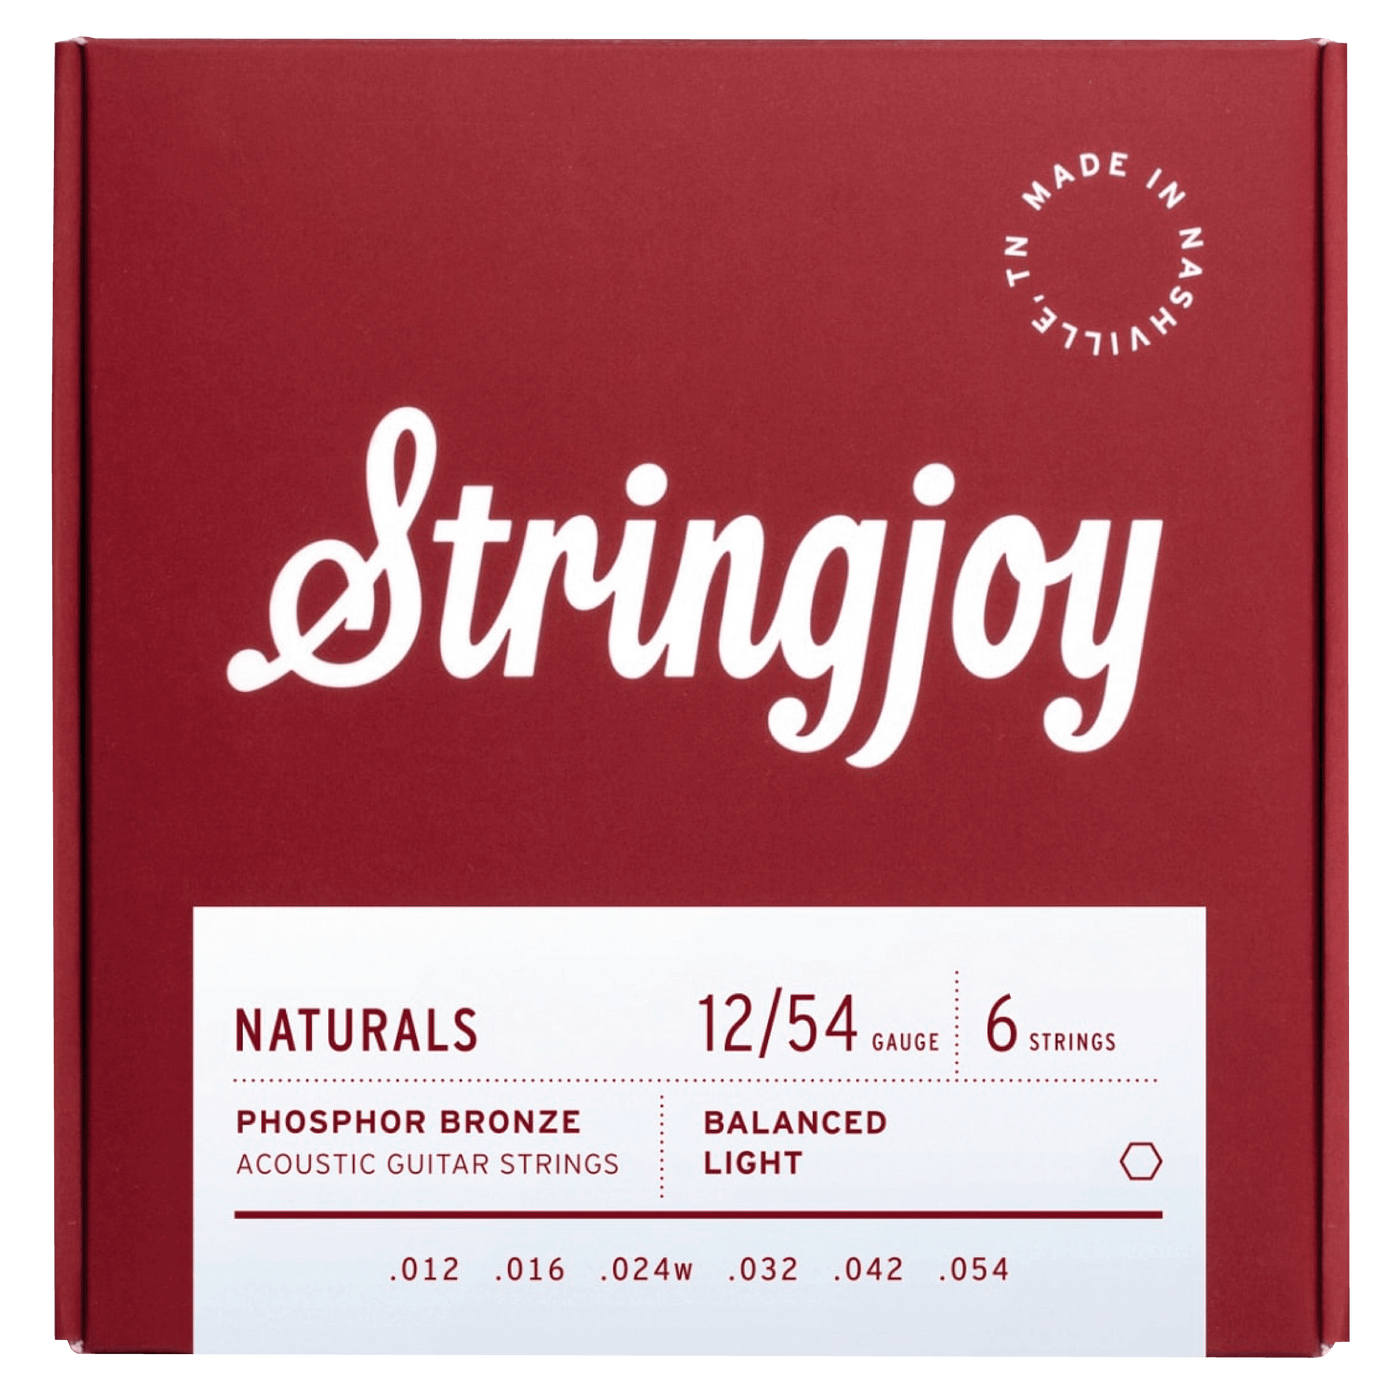 Stringjoy - Naturals Light (12-54) - $19990 - Gearhub - Looking for a set of acoustic strings that have just the right amount of tension, the right amount of tone, and still have enough volume to annoy your neighbors? Then you need a set of our Light Naturals. These are going to work great for most guitarists, since they provide excellent low-end and midrange volume while still being easy on those calluses. Naturals are our take on Phosphor Bronze, which is great at bringing out the authentic, woody charact